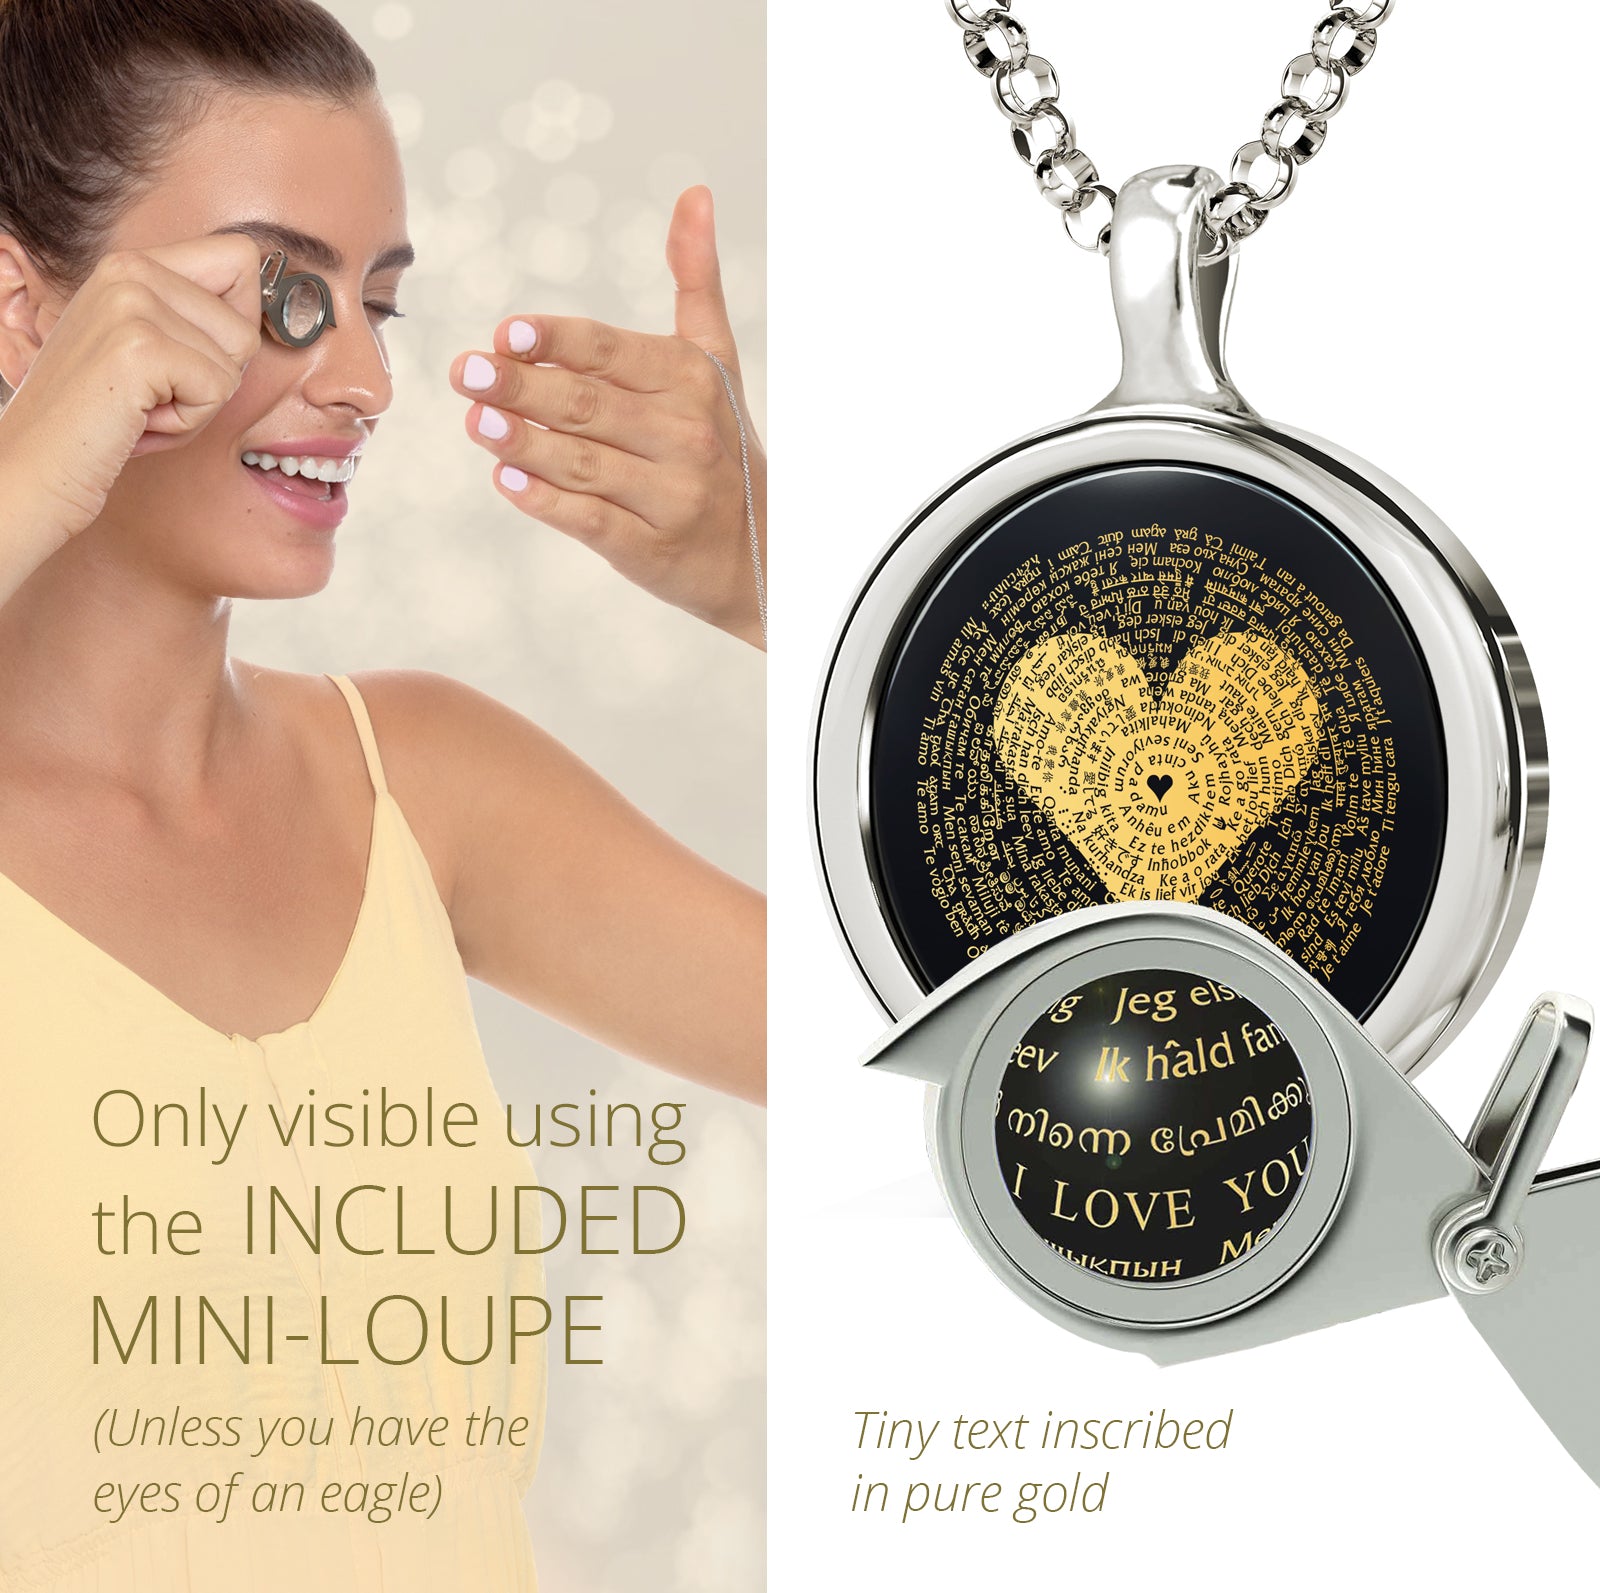 Necklace That Says I Love You in 100 Languages 100 Different Ways Rose Gold  I Love You Necklace in 100 Languages Xmas Gift V-Day Present Necklaces for  Girlfriend Wife Lover - Walmart.com